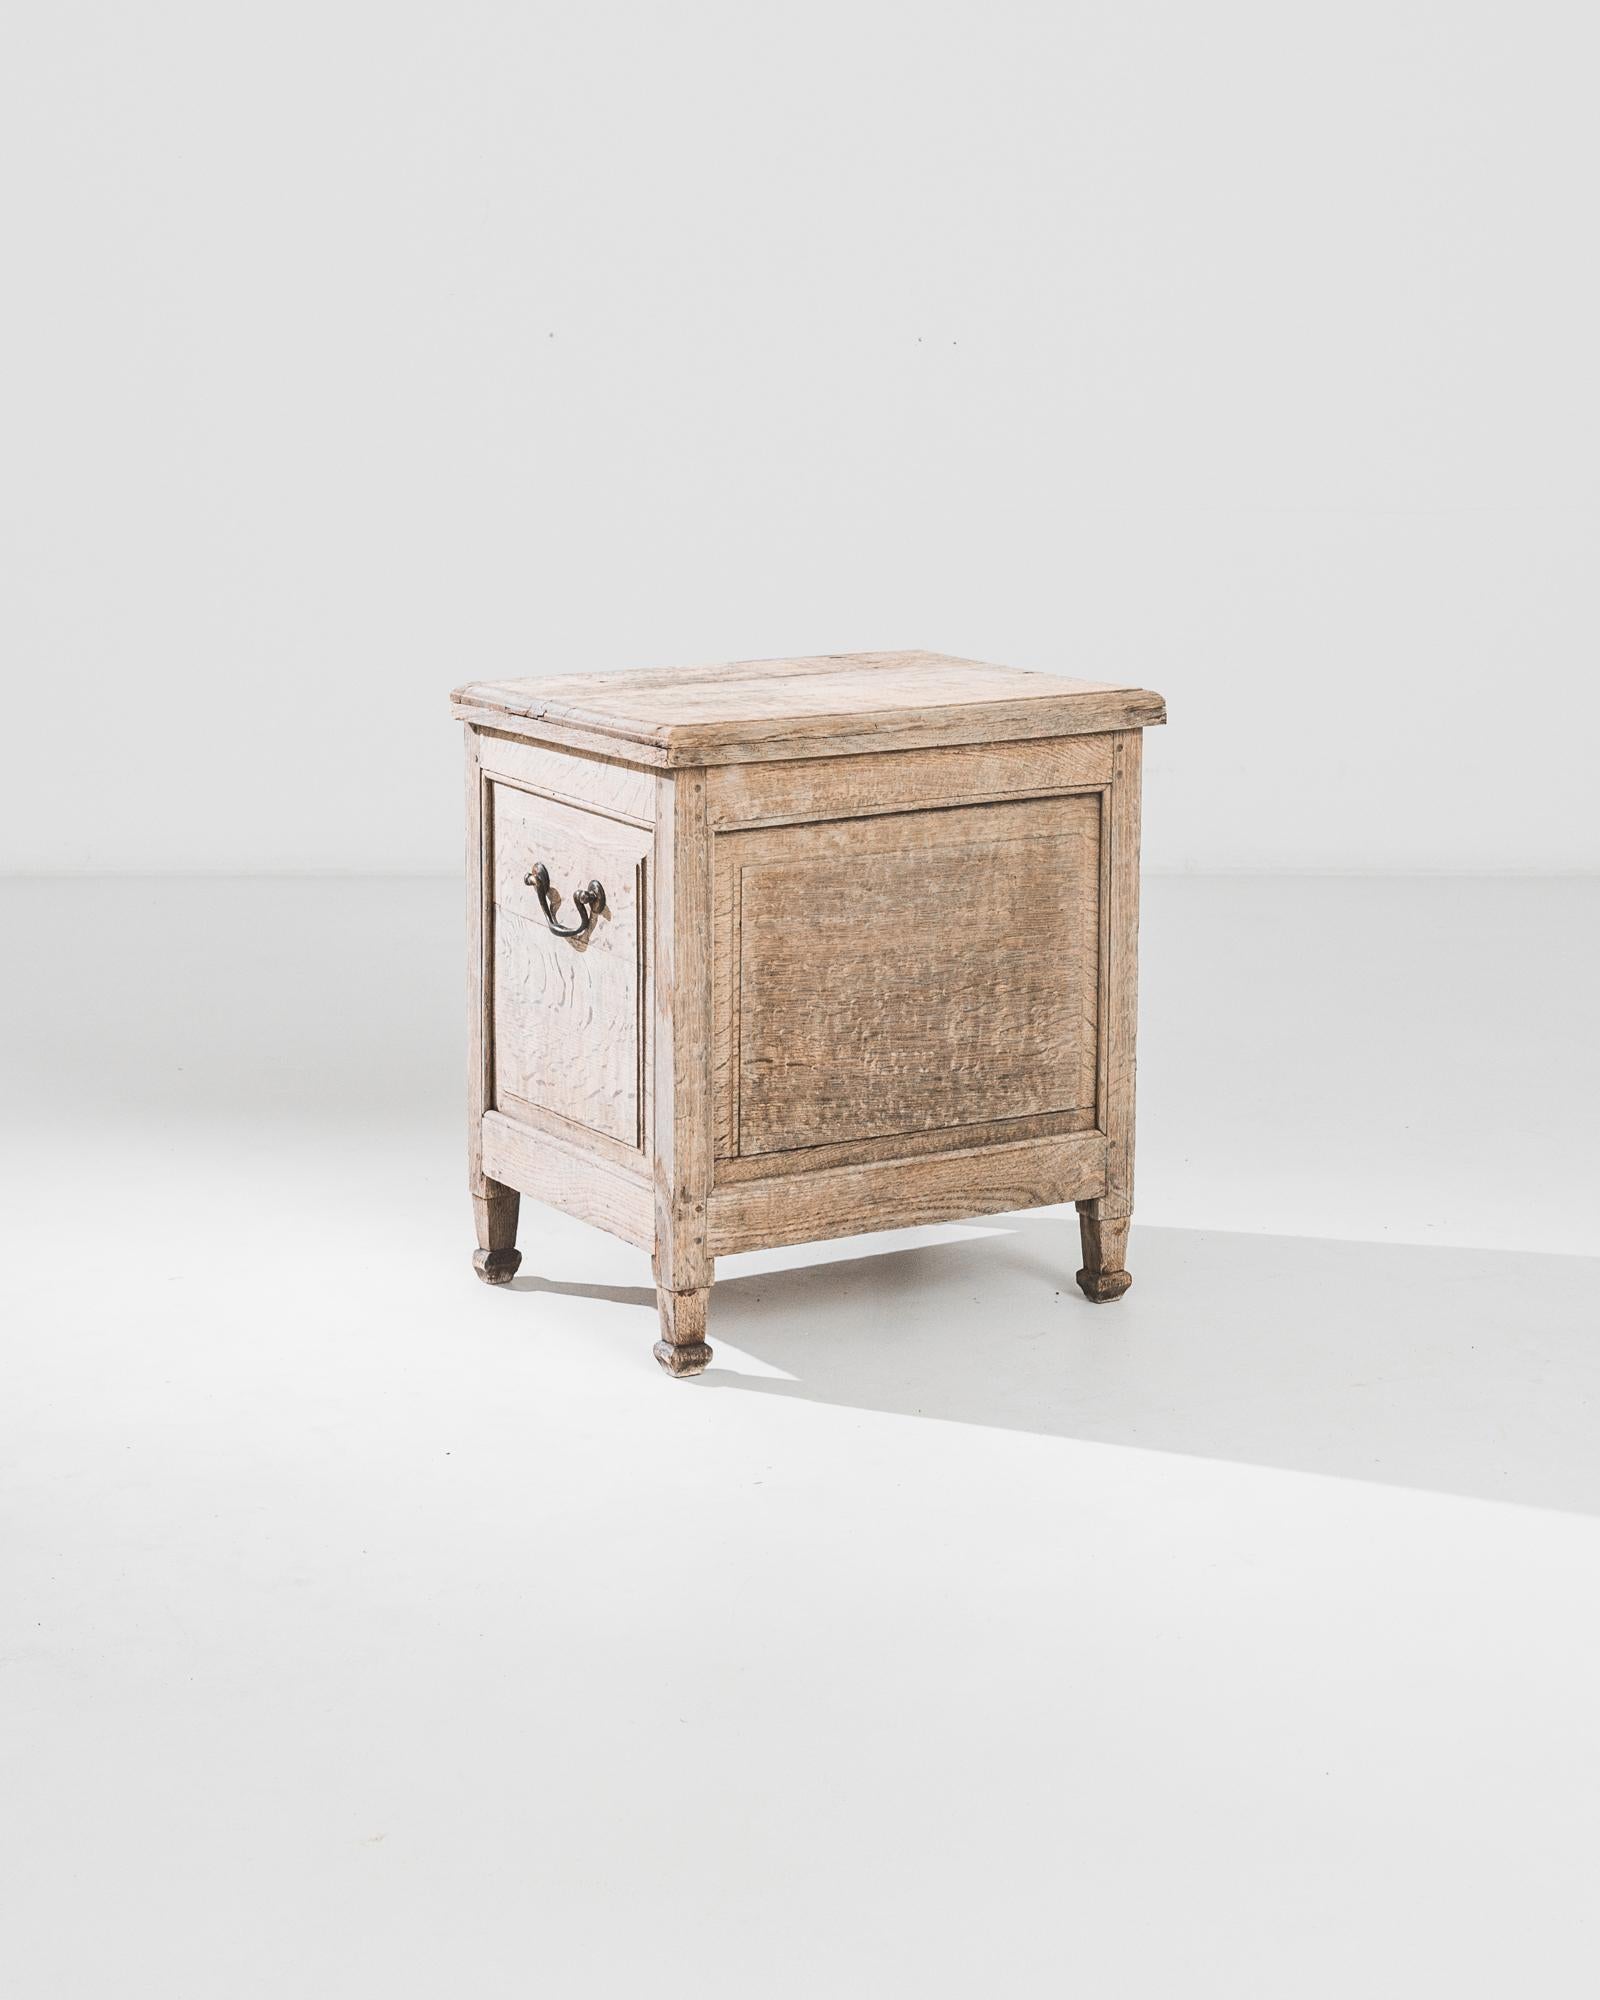 This bleached oak coffer was produced in Belgium, circa 1850. A handsome antique coffer on four tapered feet, featuring a flip-top lid and cast iron handles allowing for easy transportation. The pale sand tone and smoky grain of the natural oak take